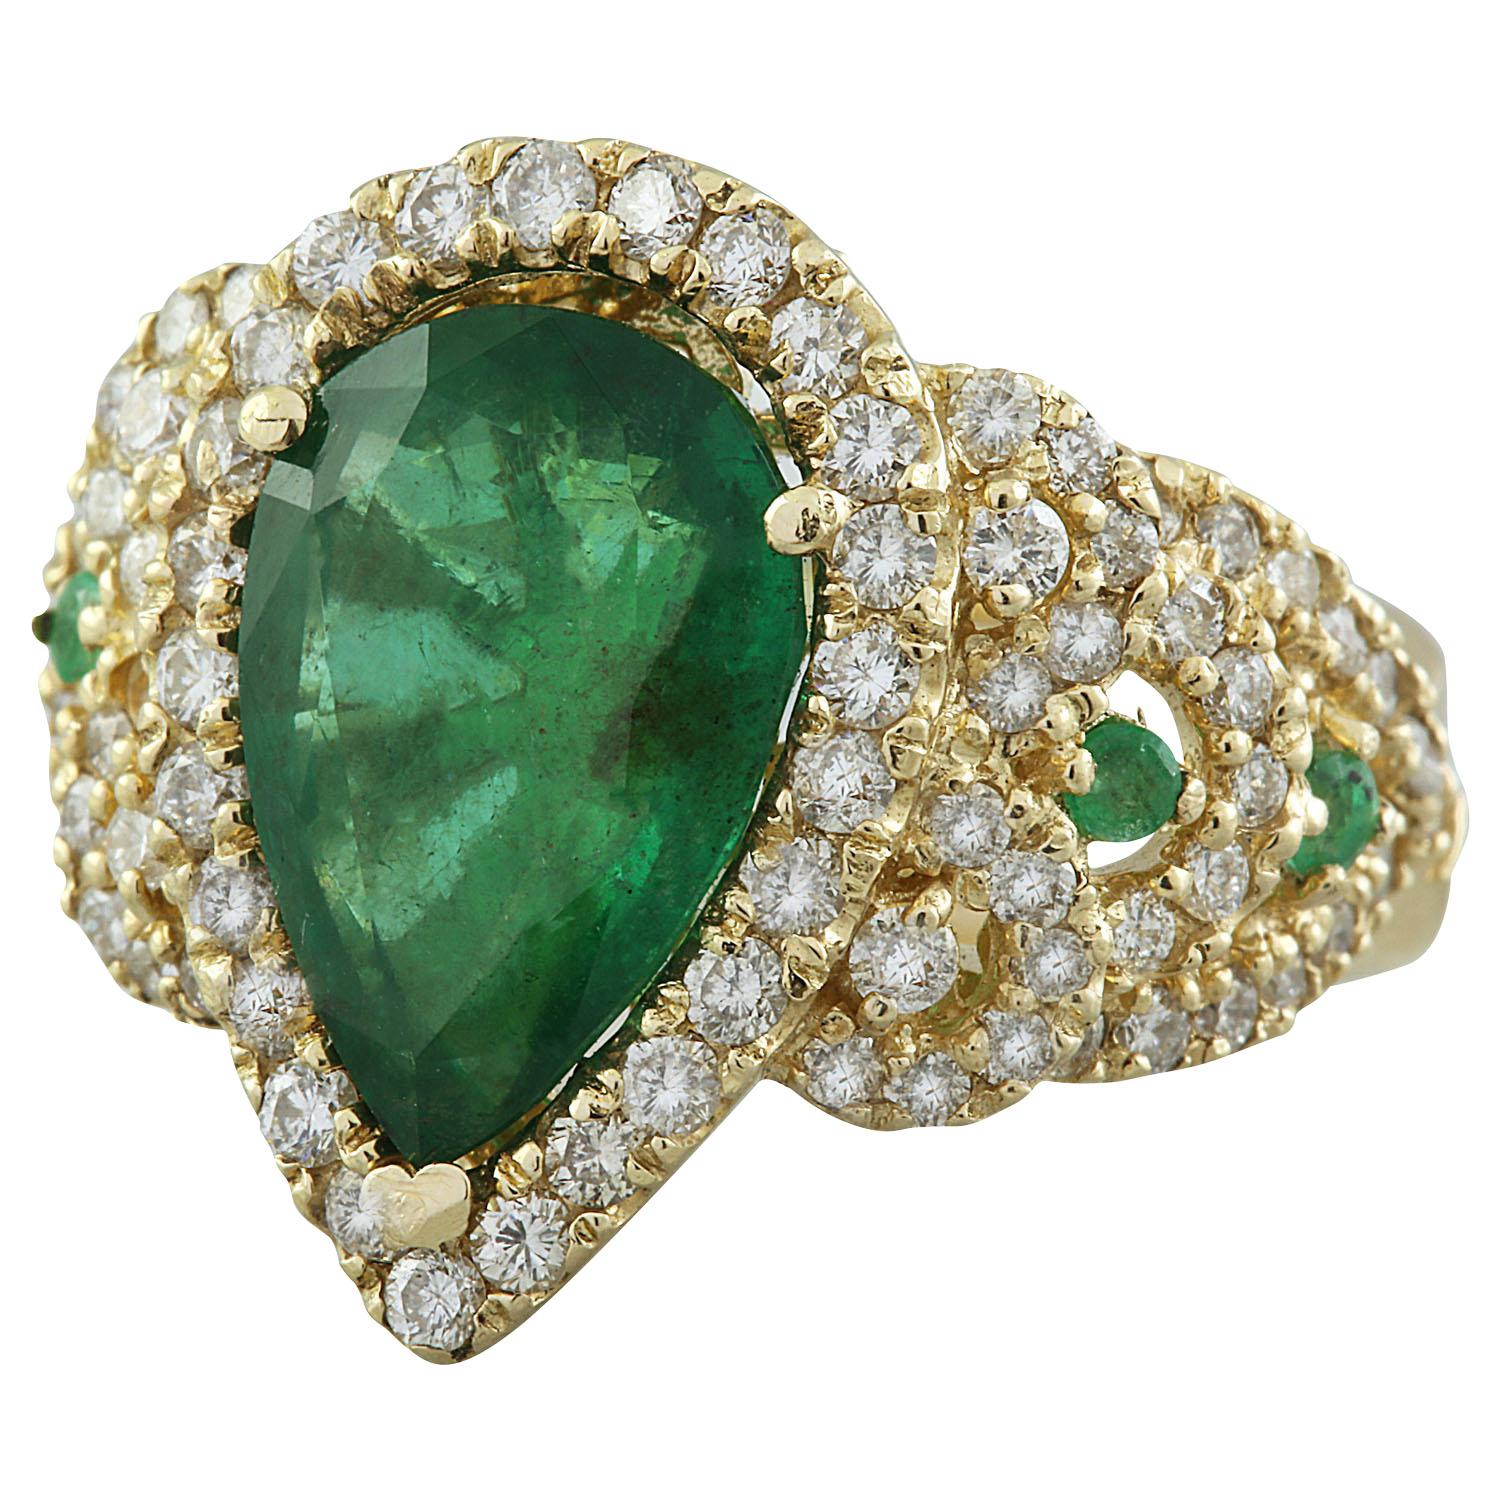 7.25 Carat Natural Emerald 14 Karat Solid Yellow Gold Diamond Ring
Stamped: 14K 
Total Ring Weight: 9 Grams
Emerald Weight 5.25 Carat (13.00x9.00 Millimeters)
Diamond Weight: 2.00 carat (F-G Color, VS2-SI1 Clarity )
Face Measures: 18.85x13.35